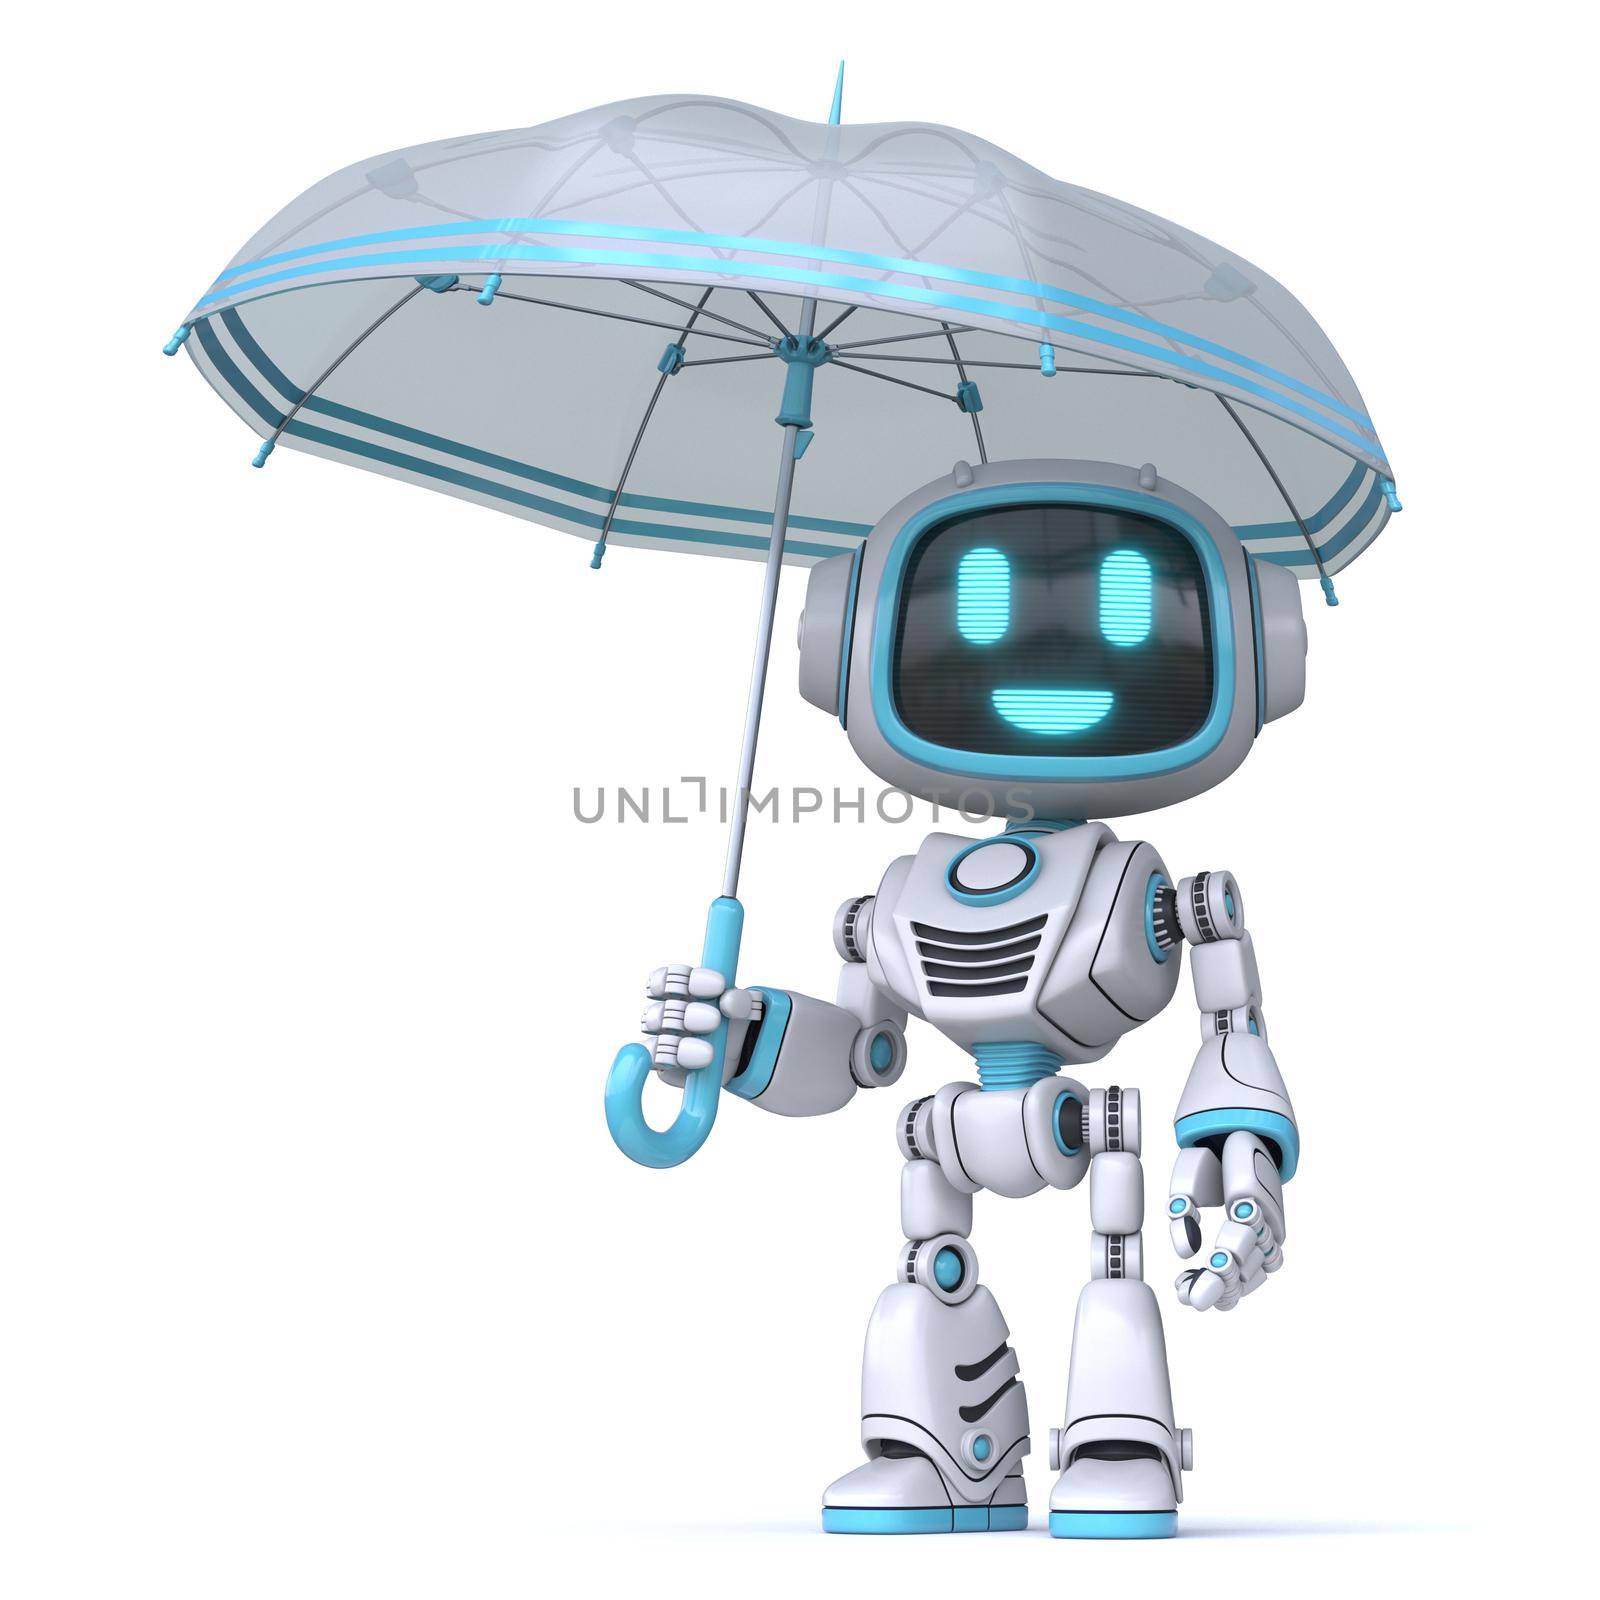 Cute blue robot holding umbrella 3D rendering illustration isolated on white background